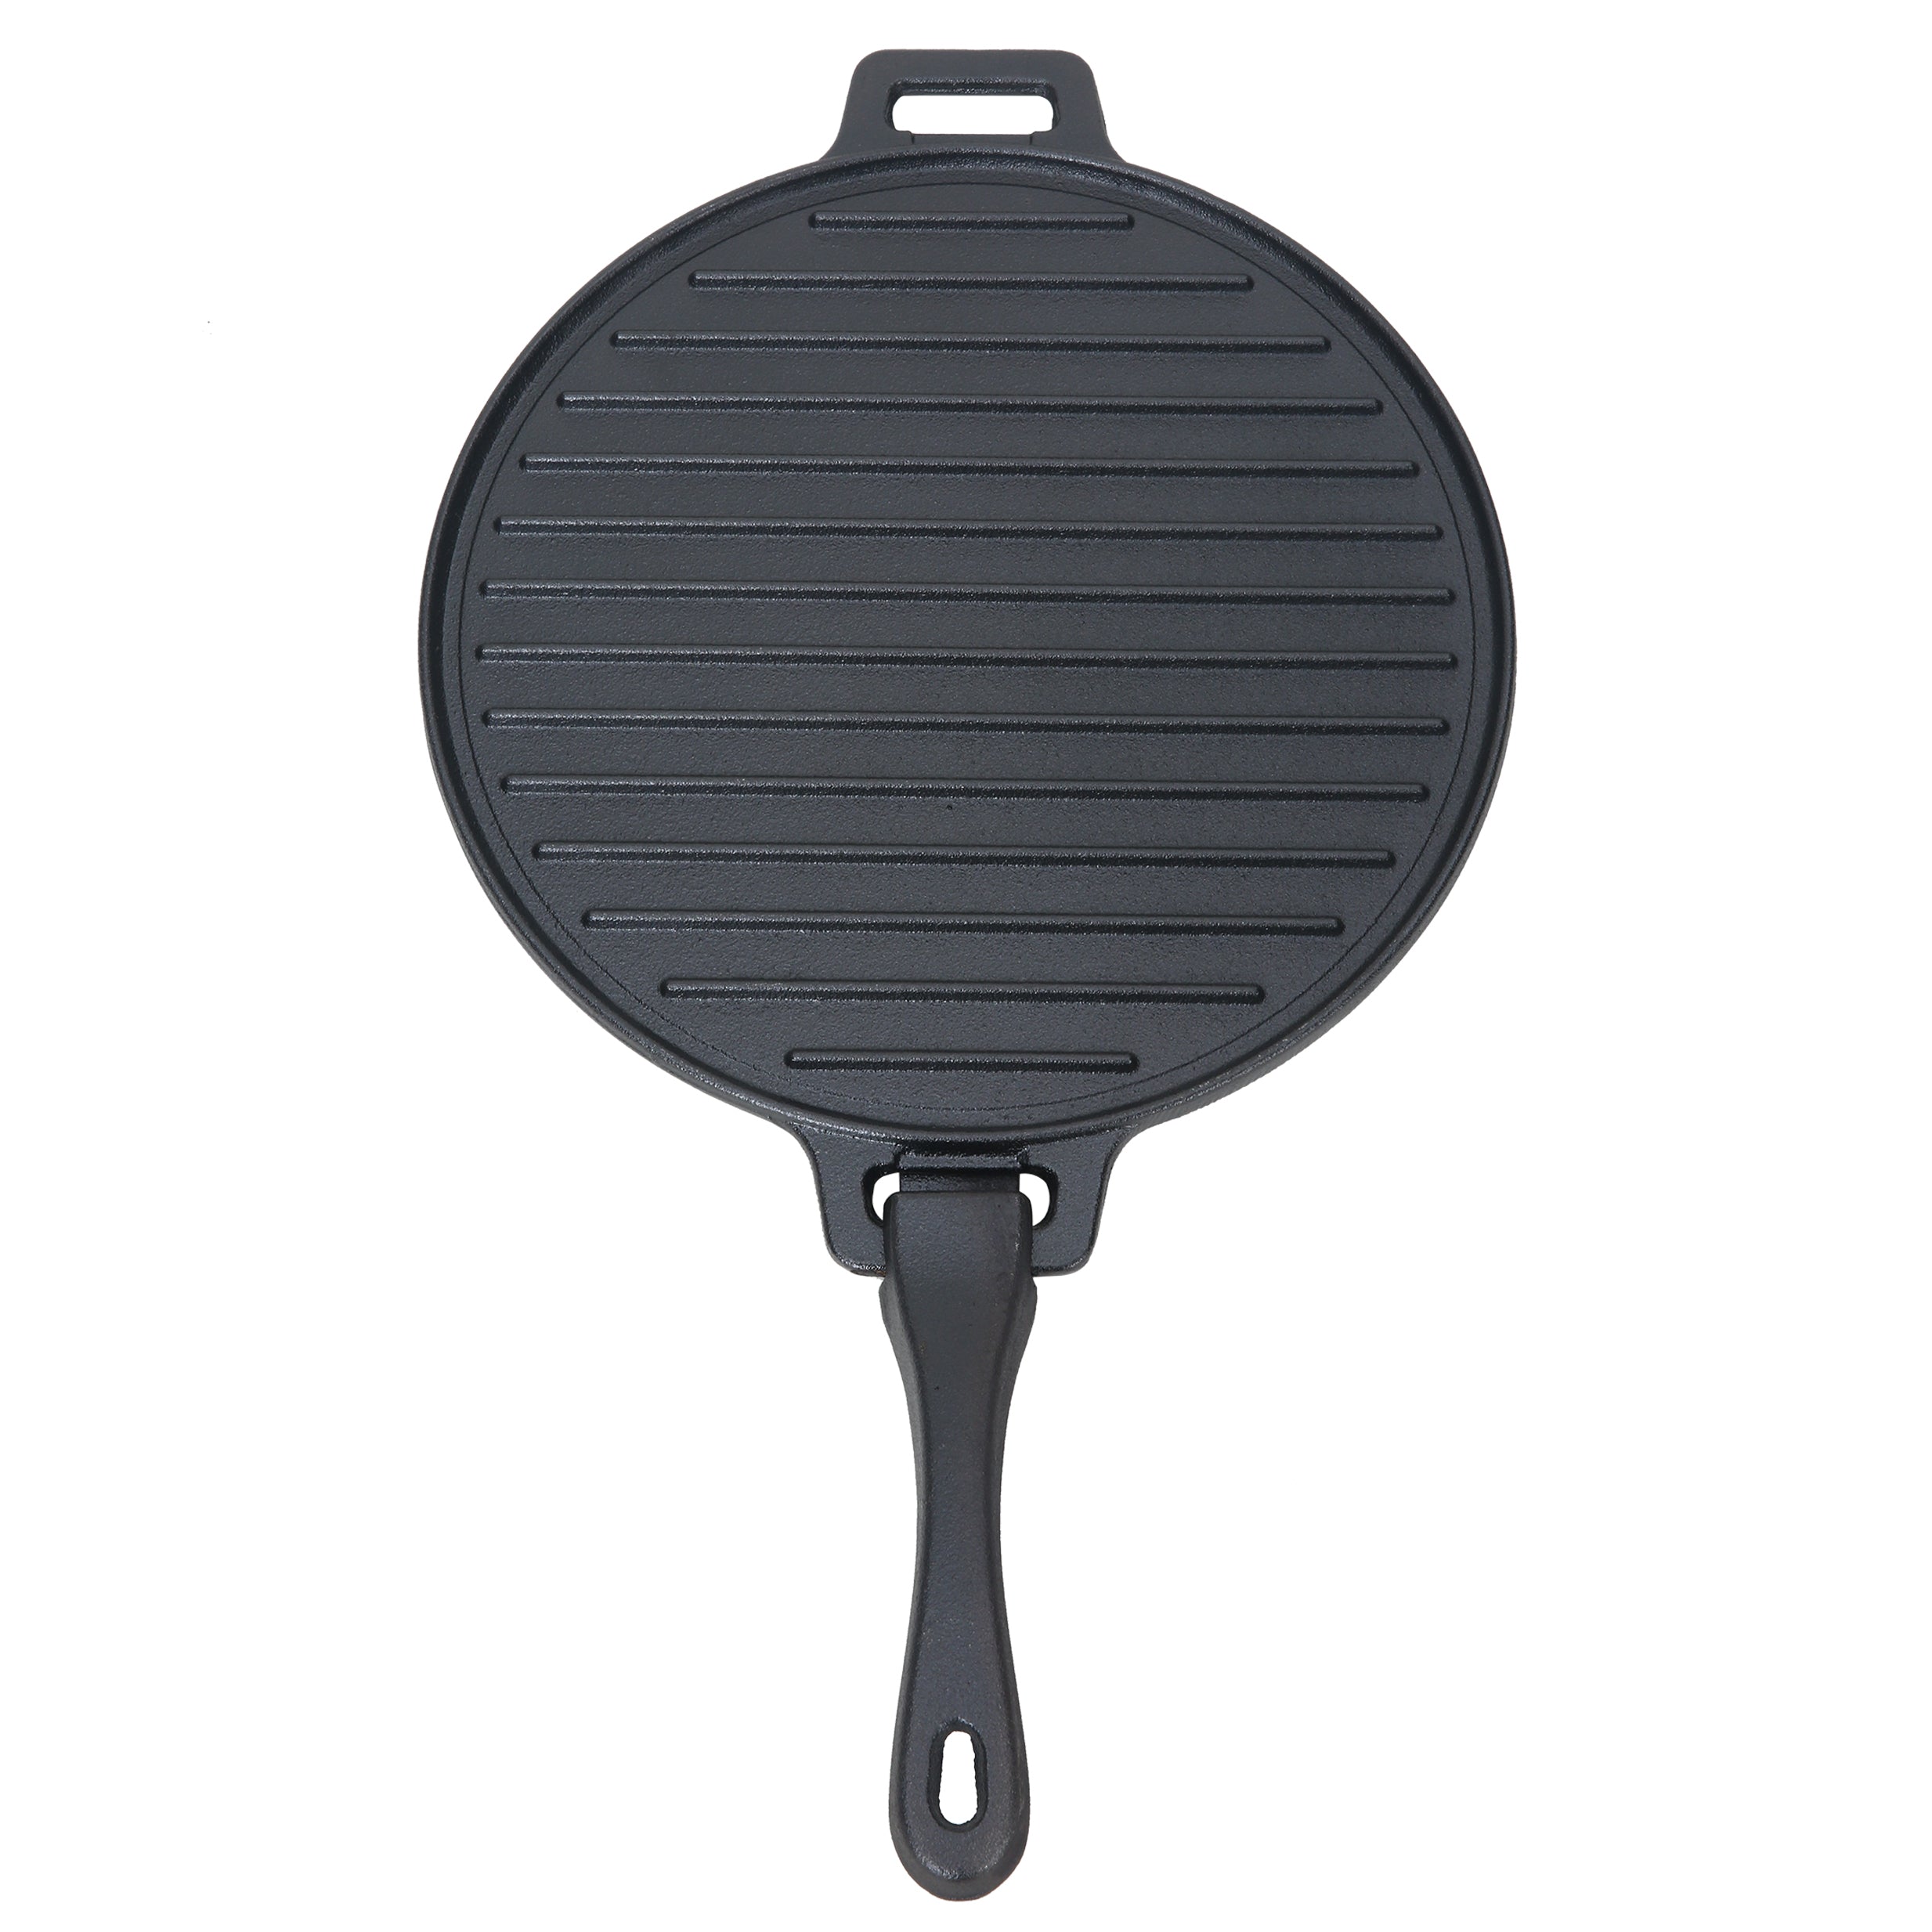  Lawei 12 Inch Cast Iron Griddles, 2-in-1 Reversible